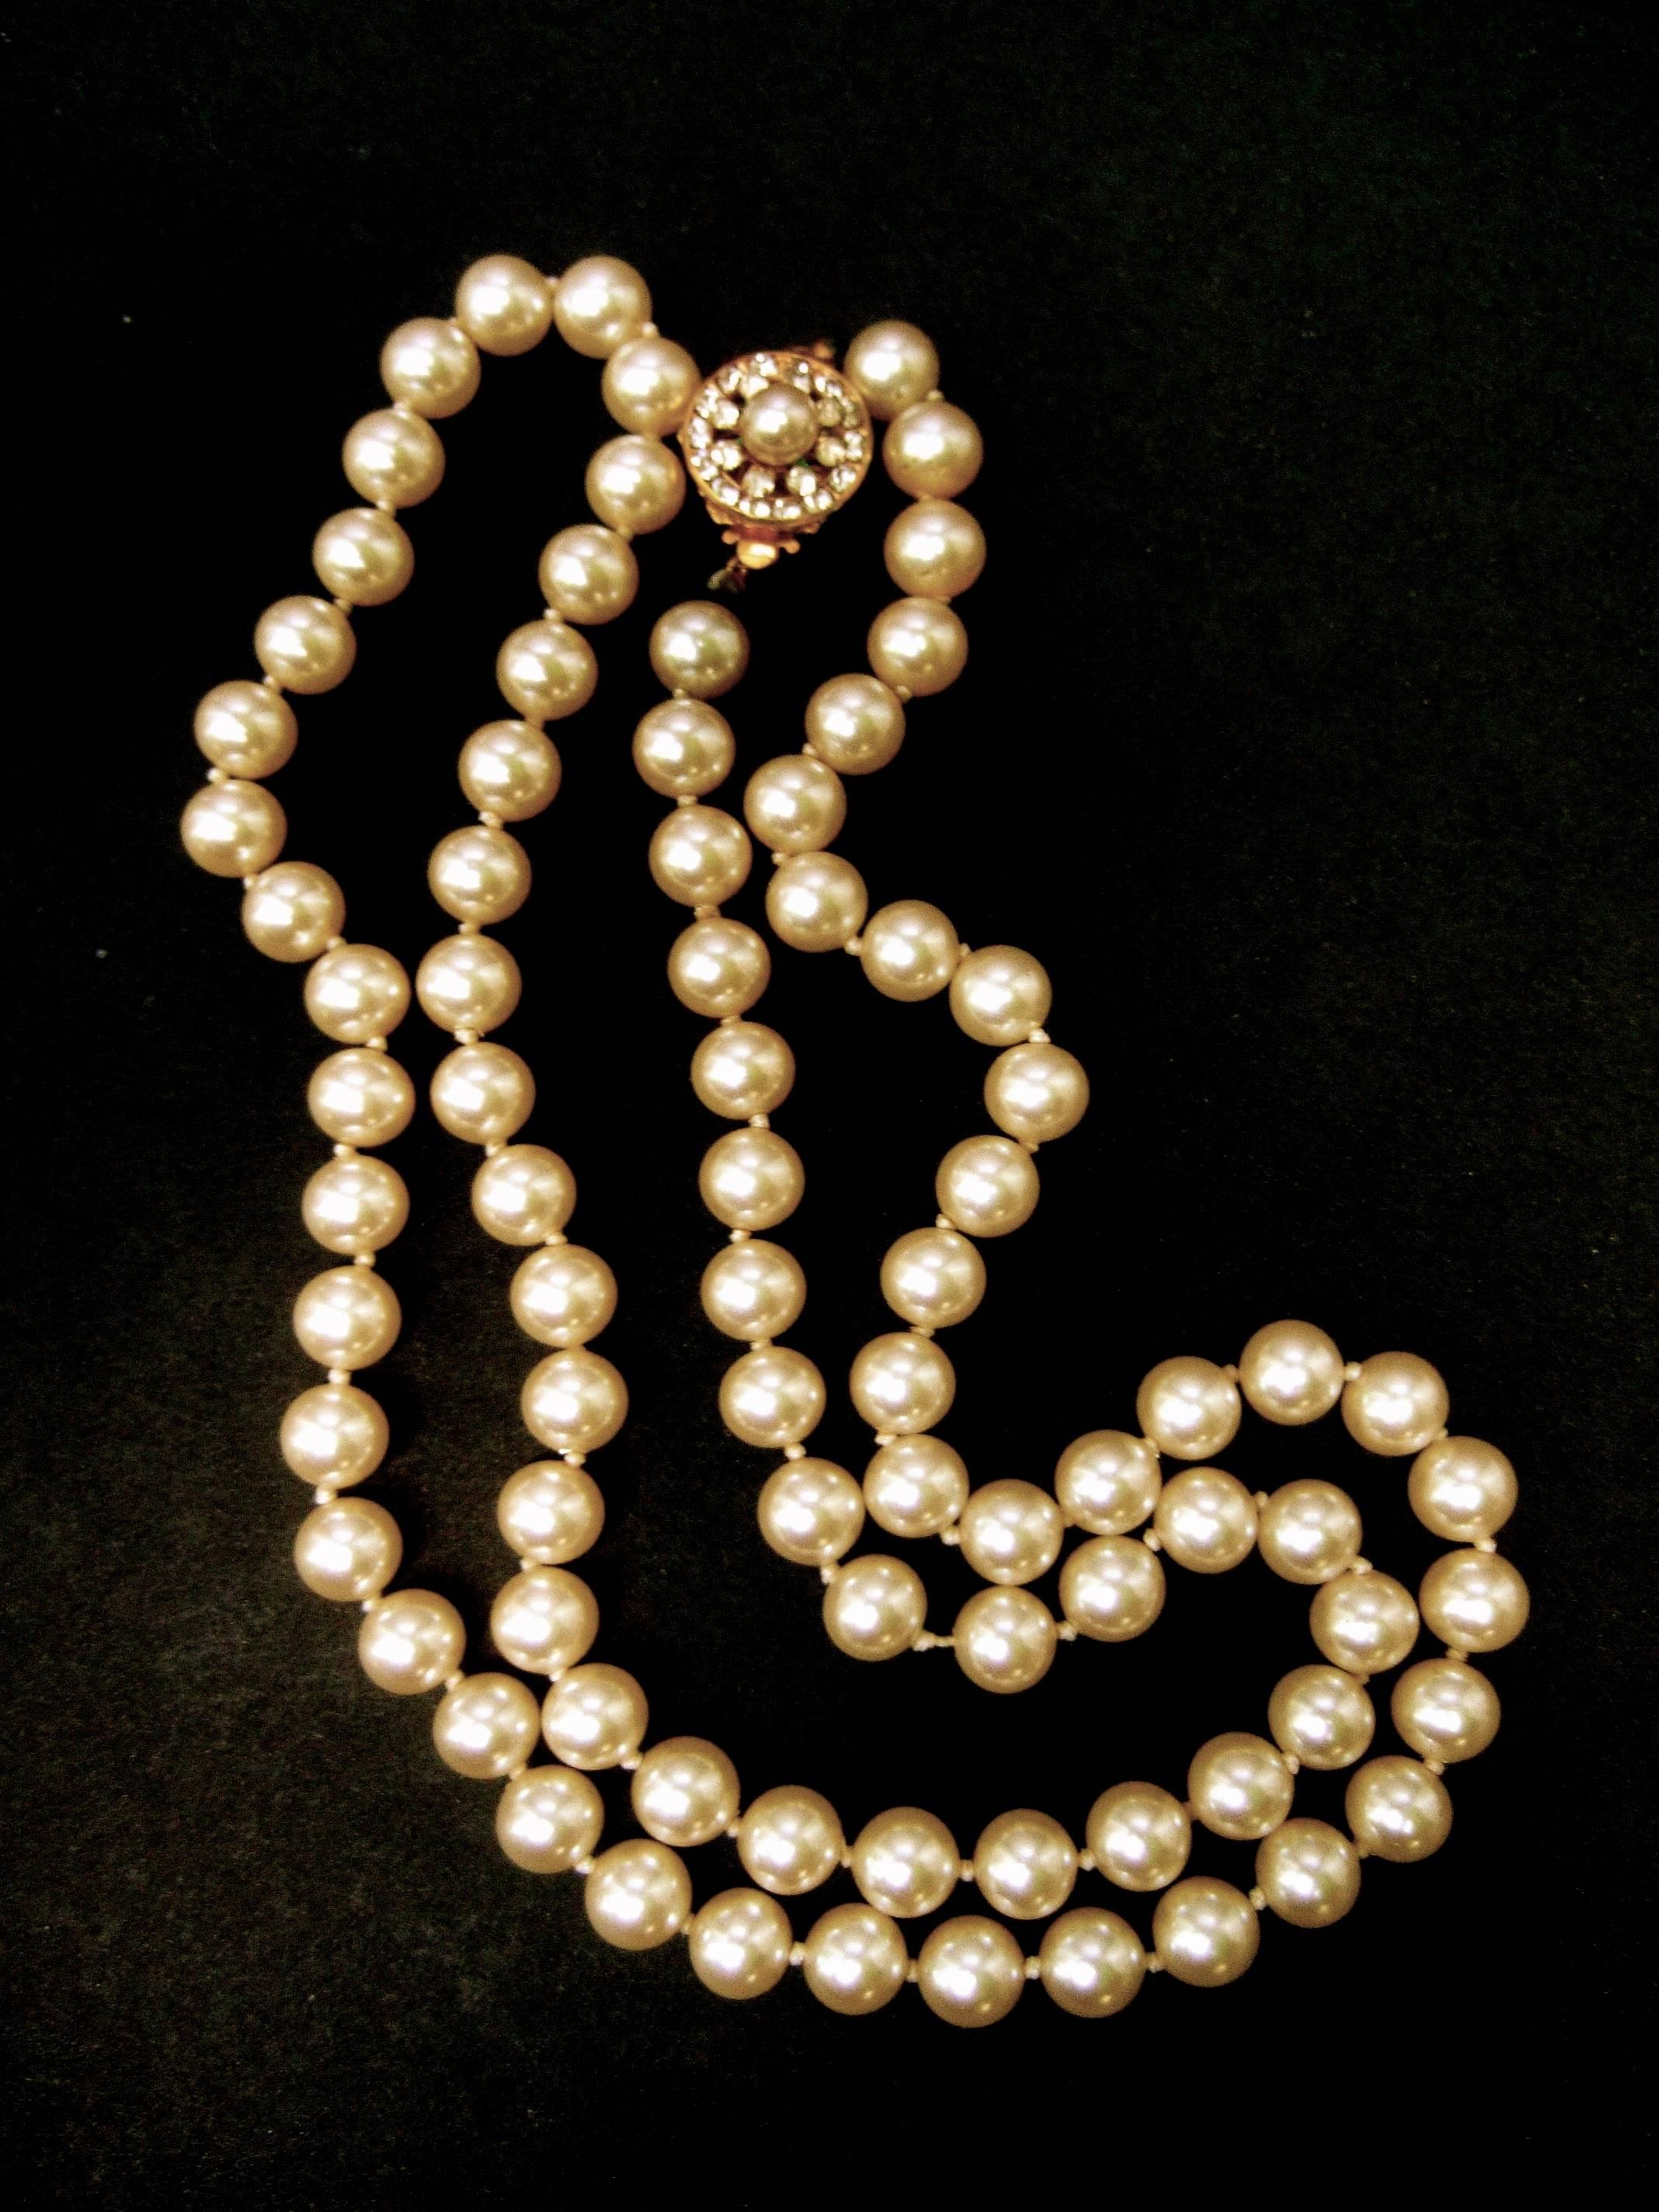 Miriam Haskell Opulent glass enamel pearl long necklace ca 1970
The chic costume pearl necklace is designed with rows 
of lustrous smooth glass pearls 

The circular gilt metal clasp is encrusted with a wreath of tiny   
glittering diamante